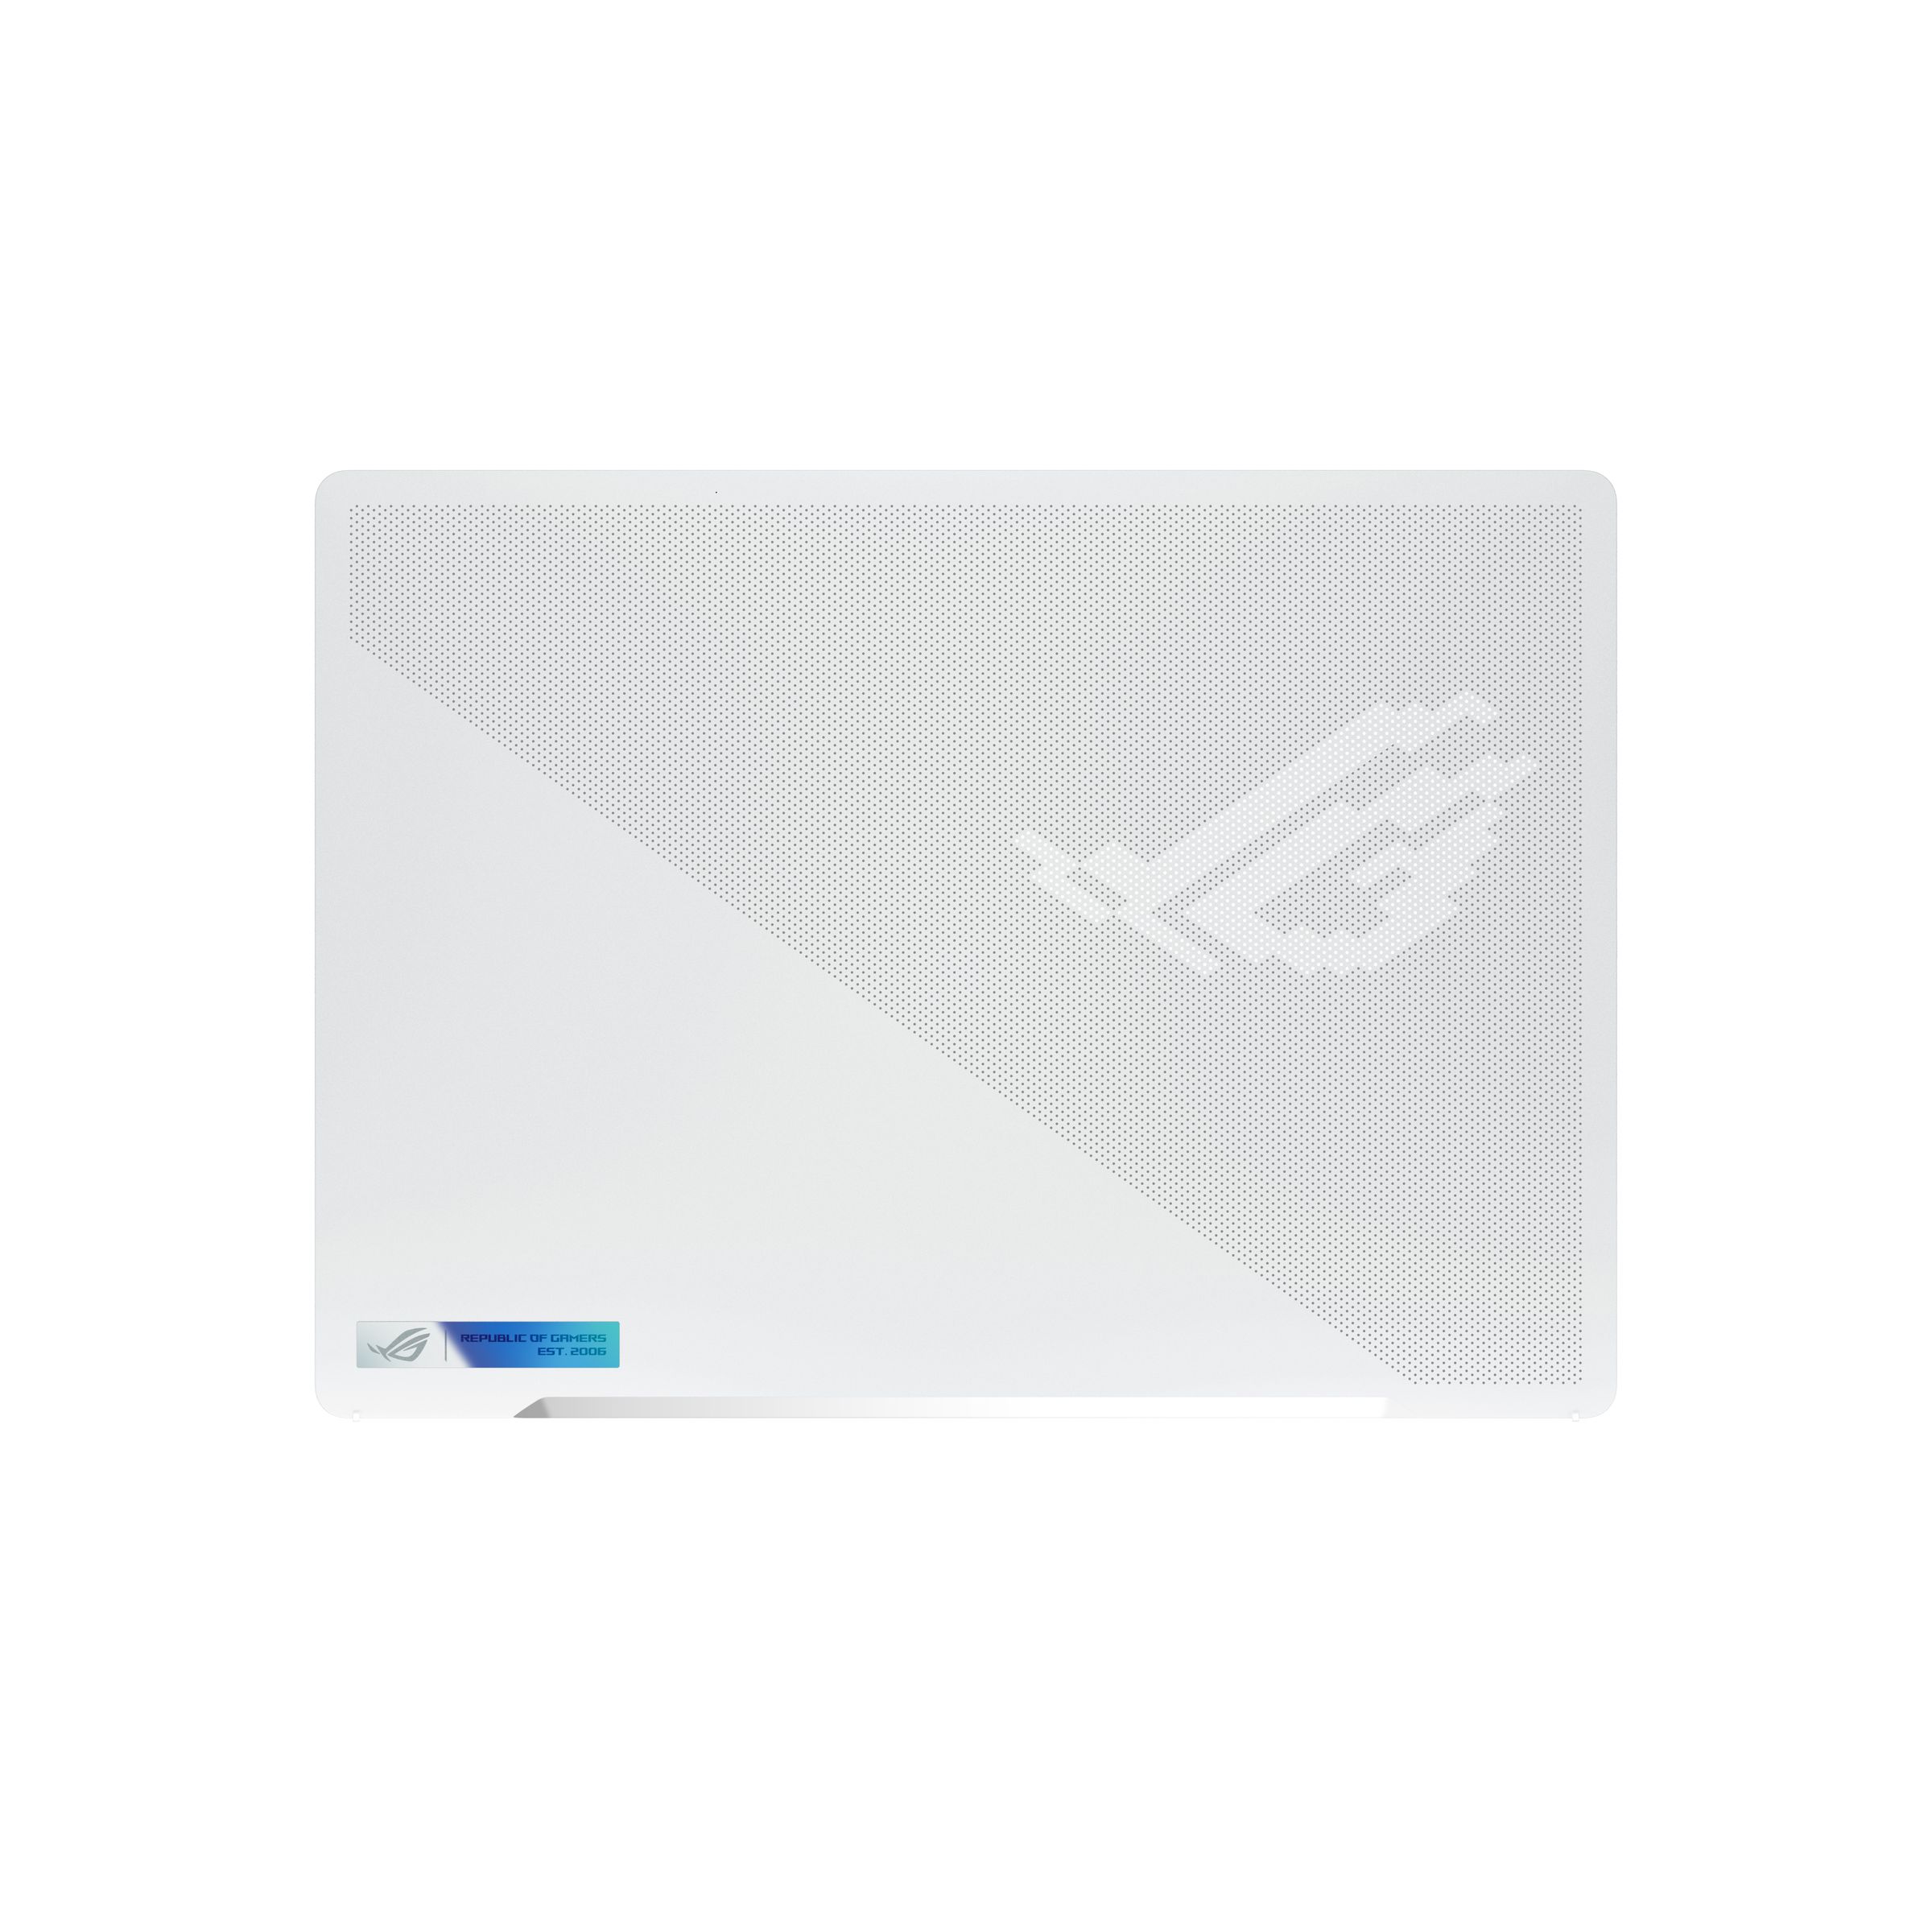 The lid of the Asus ROG Zephyrus G14 closed on a white background.